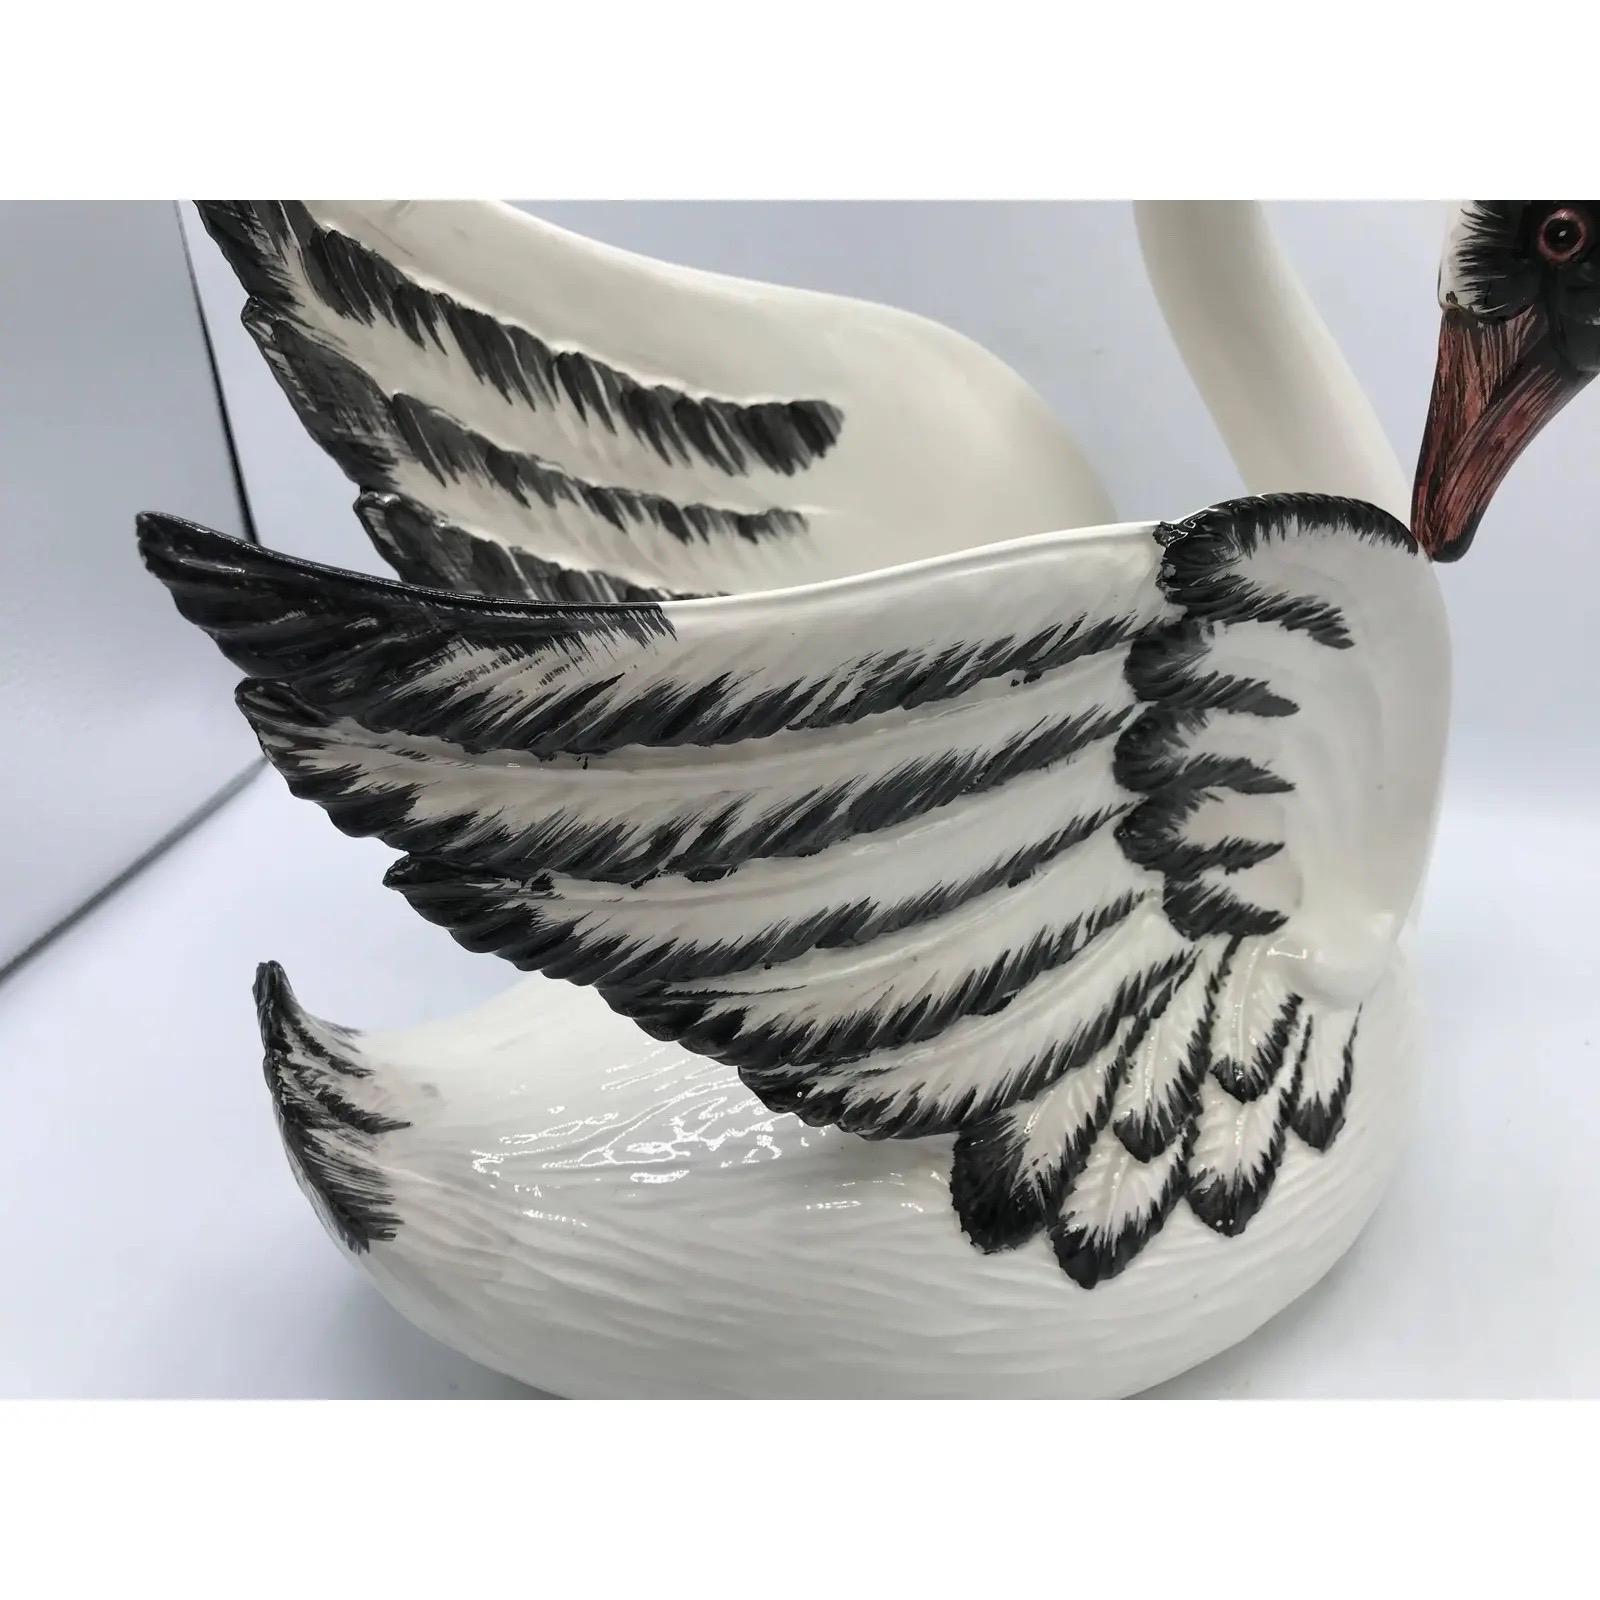 Late 20th Century 1970s Italian Mottahedeh Ceramic Swan Sculpture For Sale